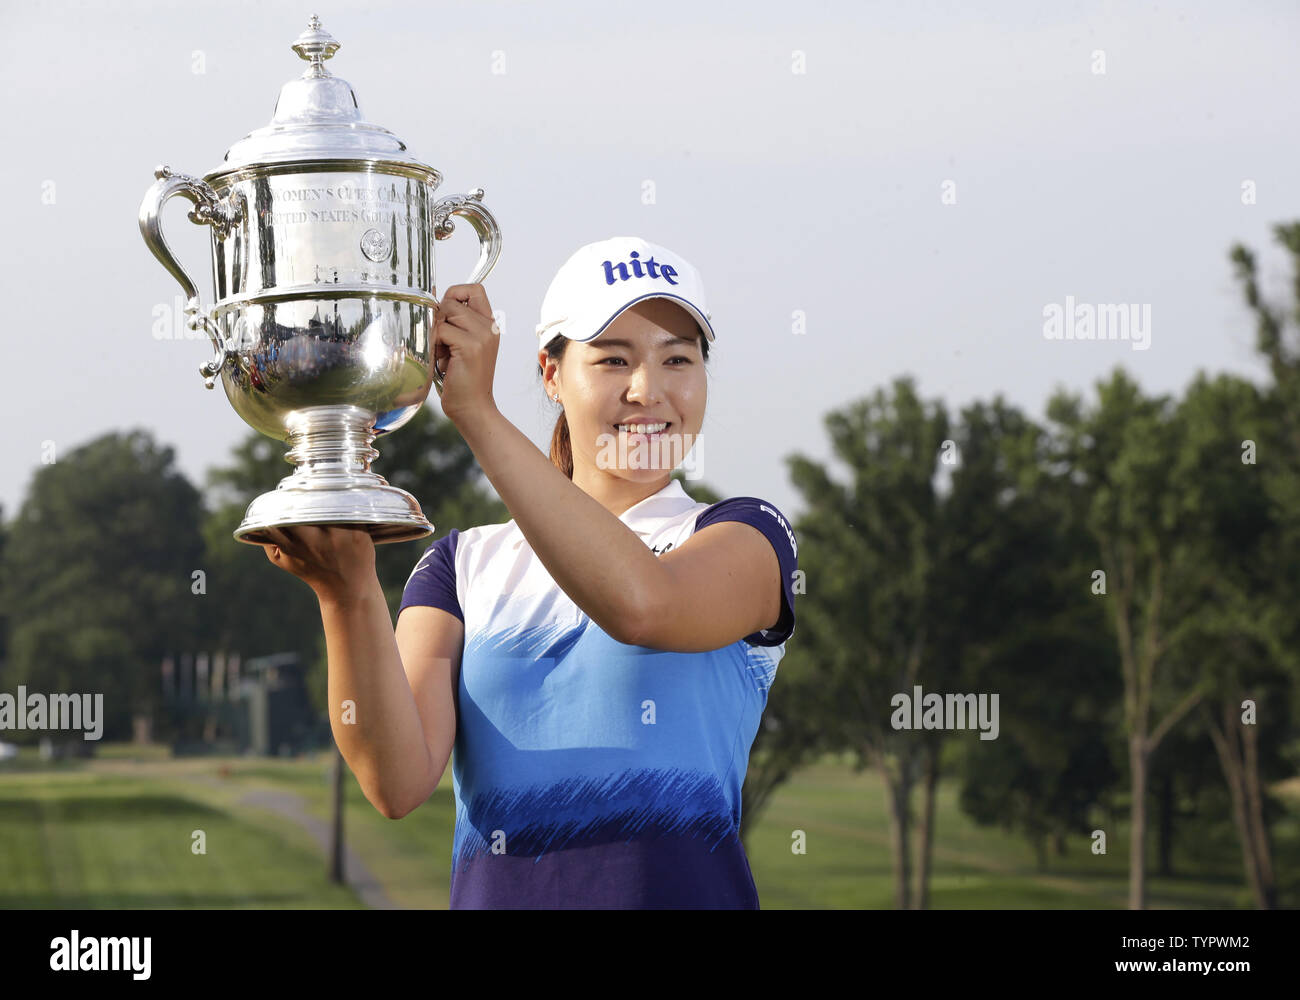 In Gee Chun of Korea holds up the championship trophy on the 18th green in the final round of the LPGA U.S. Women's Open Championship at Lancaster Country Club in Lancaster, PA on July 12, 2015. Chun wins the U.S. Women's Open and her first LPGA major championship with a score of 8 under par.     Photo by John Angelillo/UPI Stock Photo